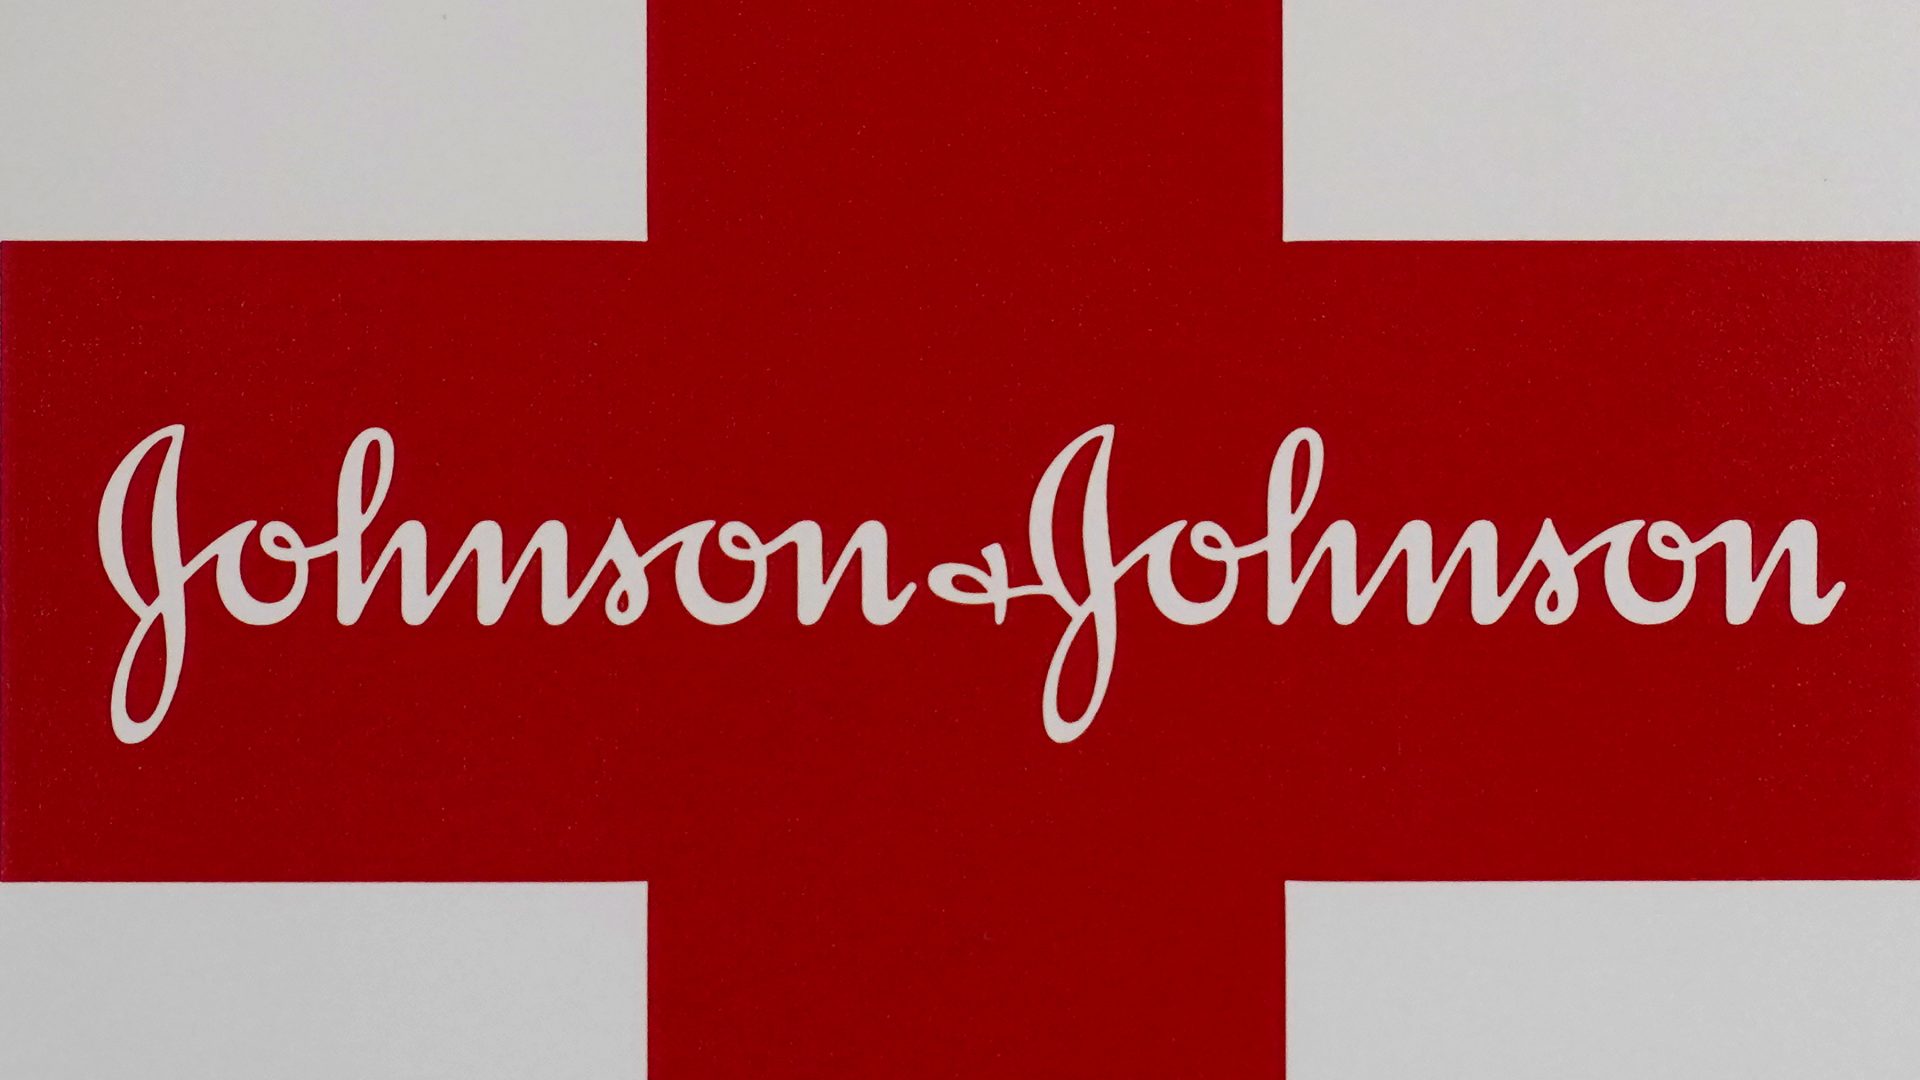 This Feb. 24, 2021 photo shows a Johnson & Johnson logo on the exterior of a first aid kit in Walpole, Mass.  The New York attorney general says Johnson & Johnson has agreed to pay $230 million to settle claims that the pharmaceutical giant helped fuel the opioid crisis. The deal requires Johnson & Johnson to make a series of payments over nine years to cover total.   (AP Photo/Steven Senne)